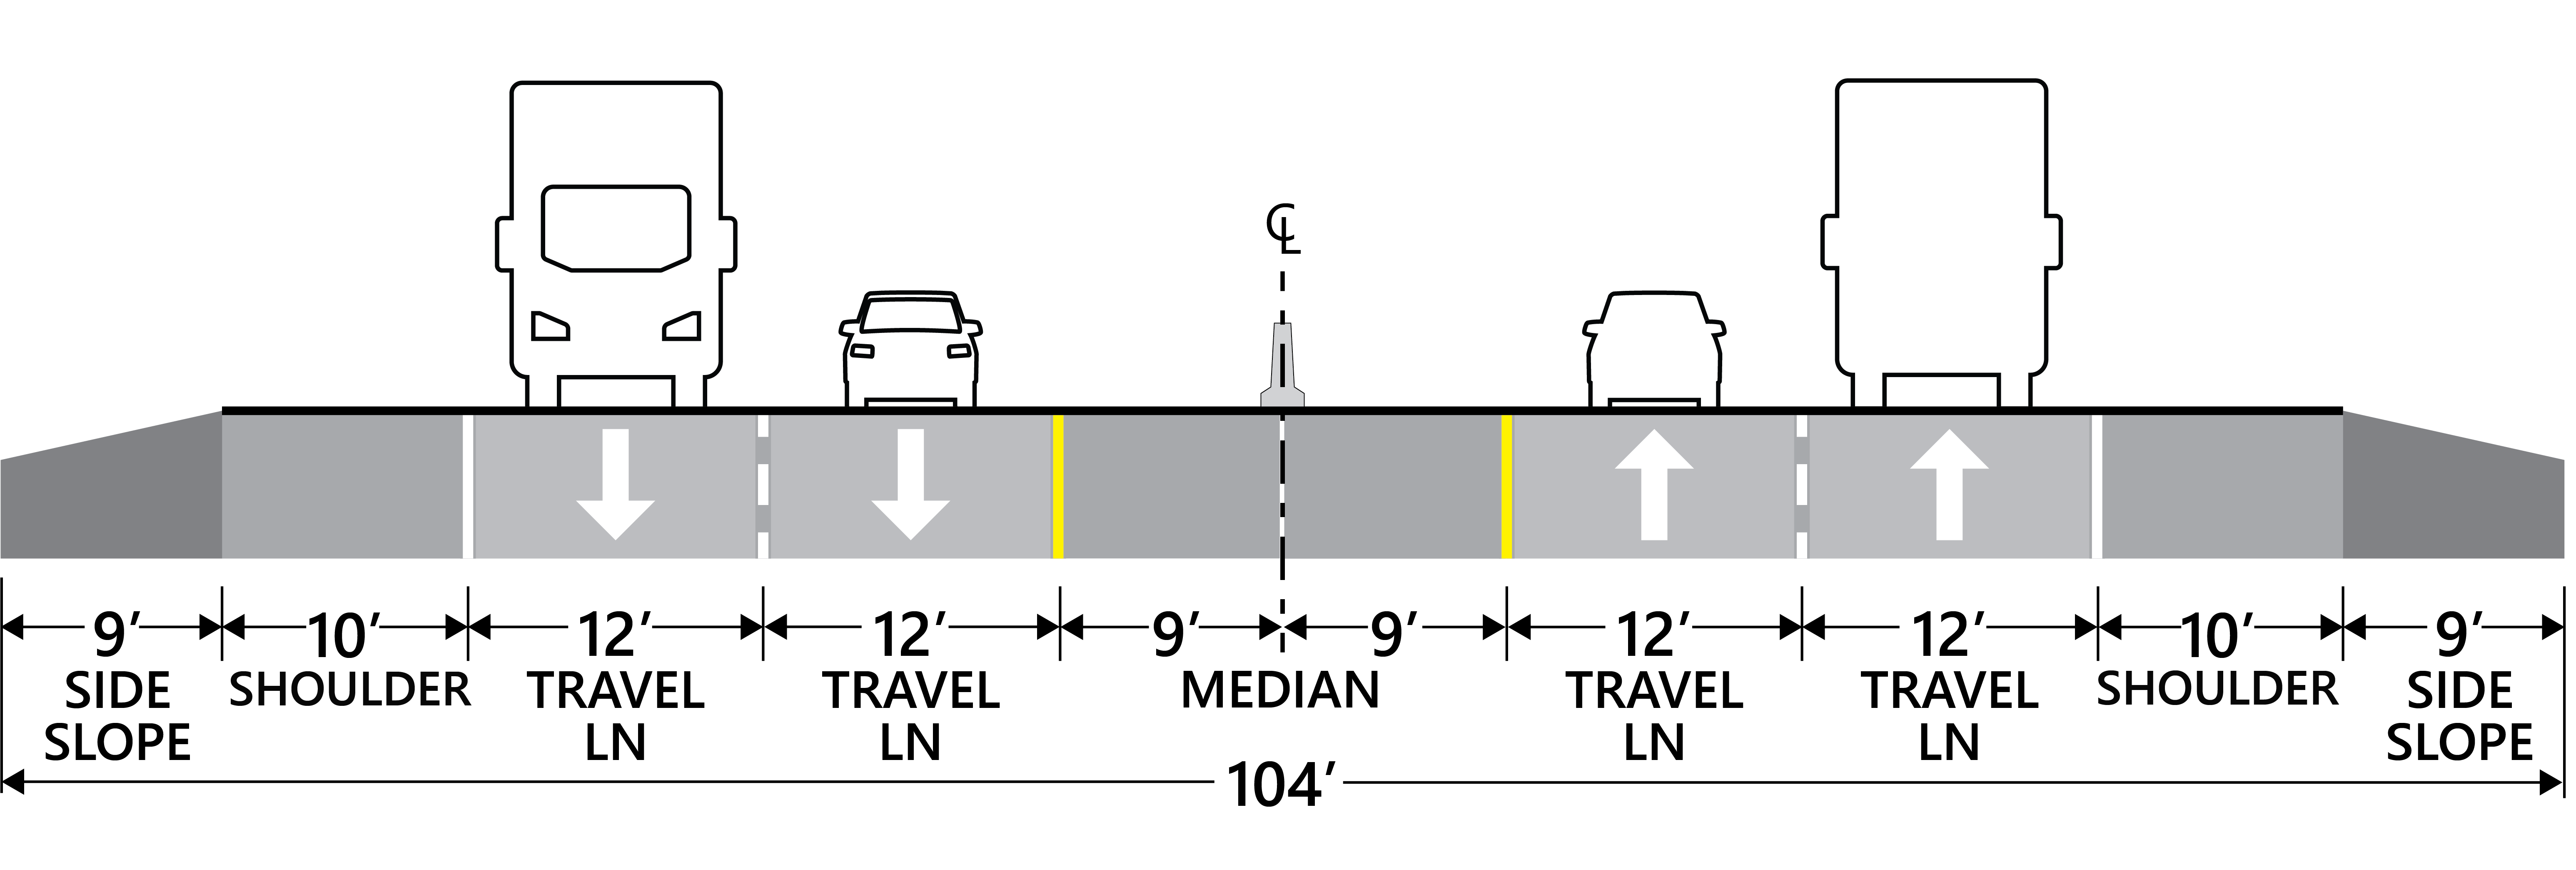 Cross section for OR 18 with 9' side slope, 10' shoulder, and two 12' travel lane for vehicles in each direction divided by 18' median.. 